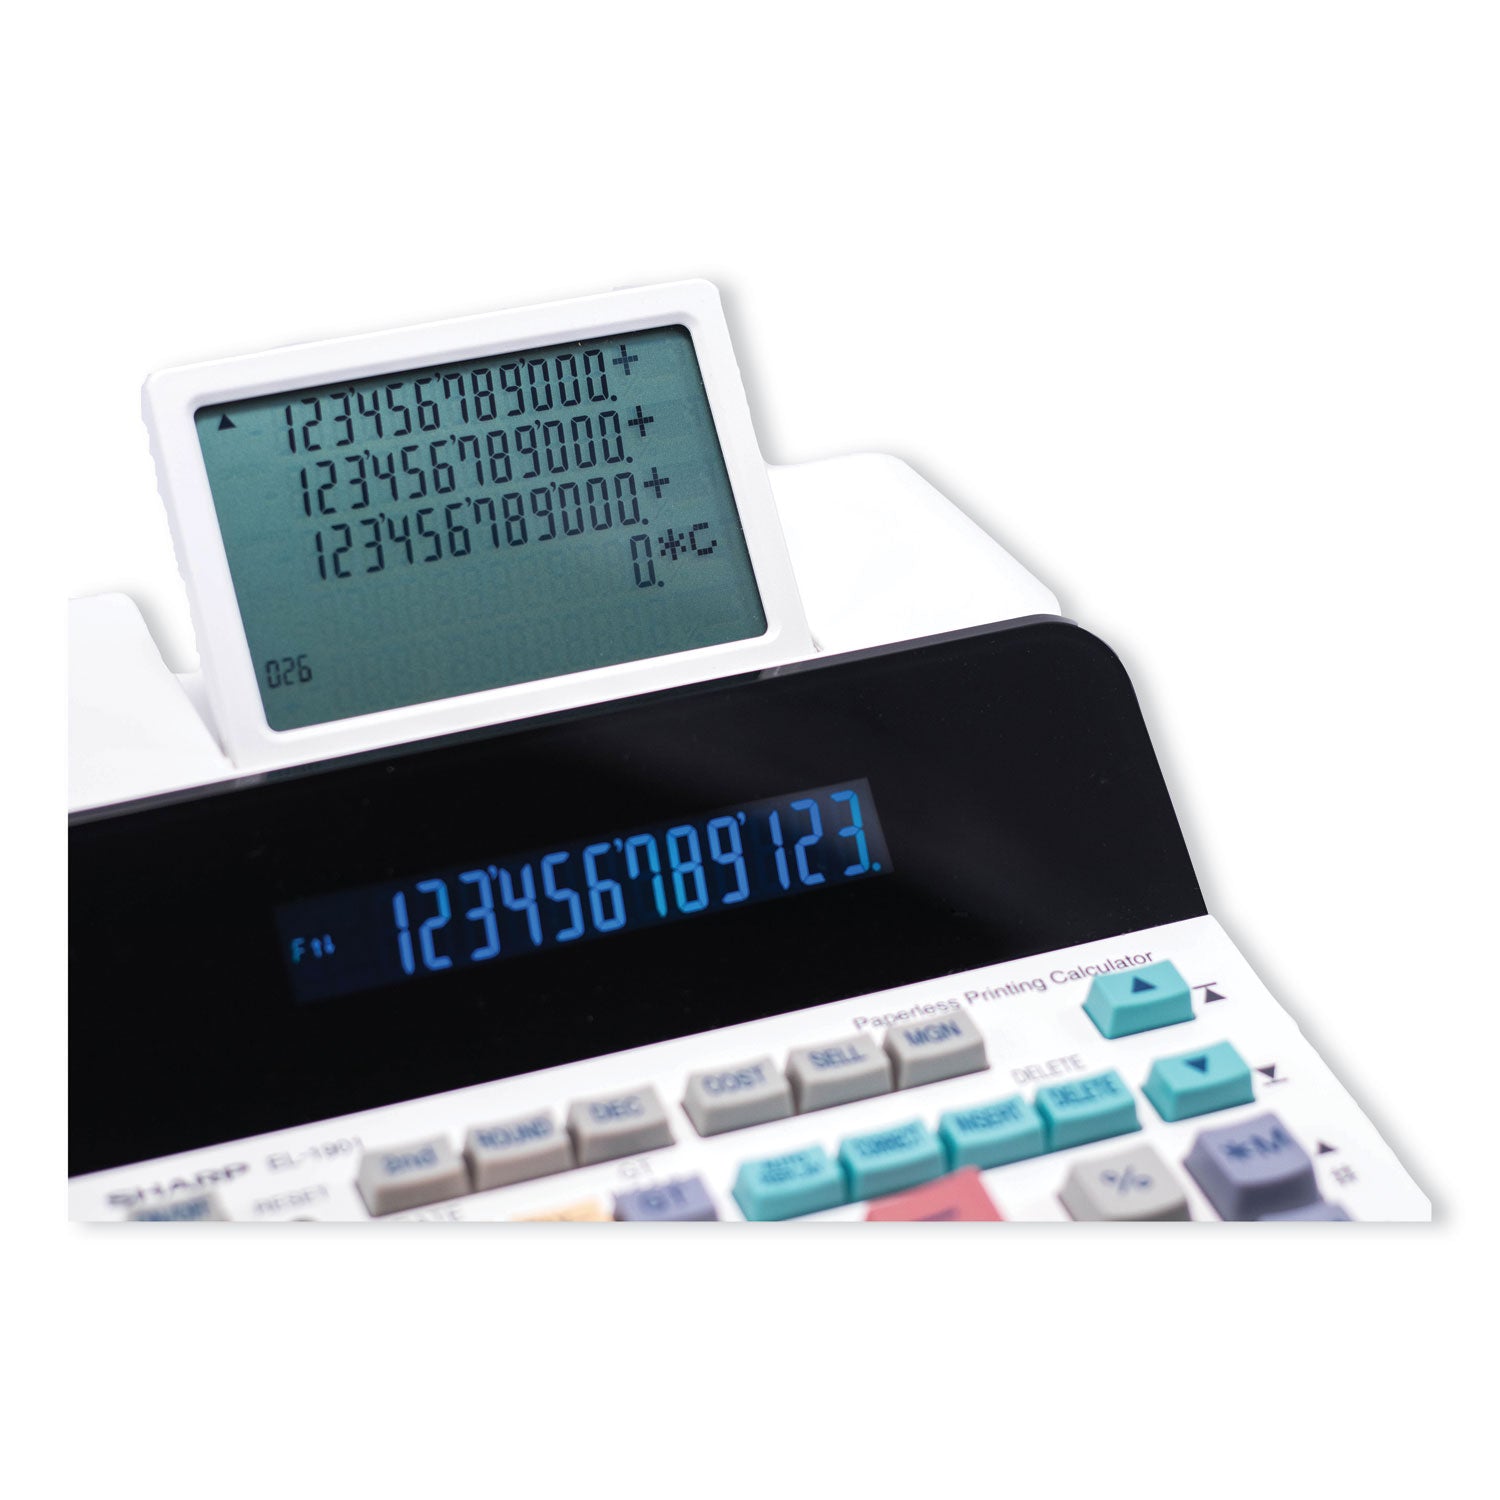 el-1901-paperless-printing-calculator-with-check-and-correct_shrel1901 - 6